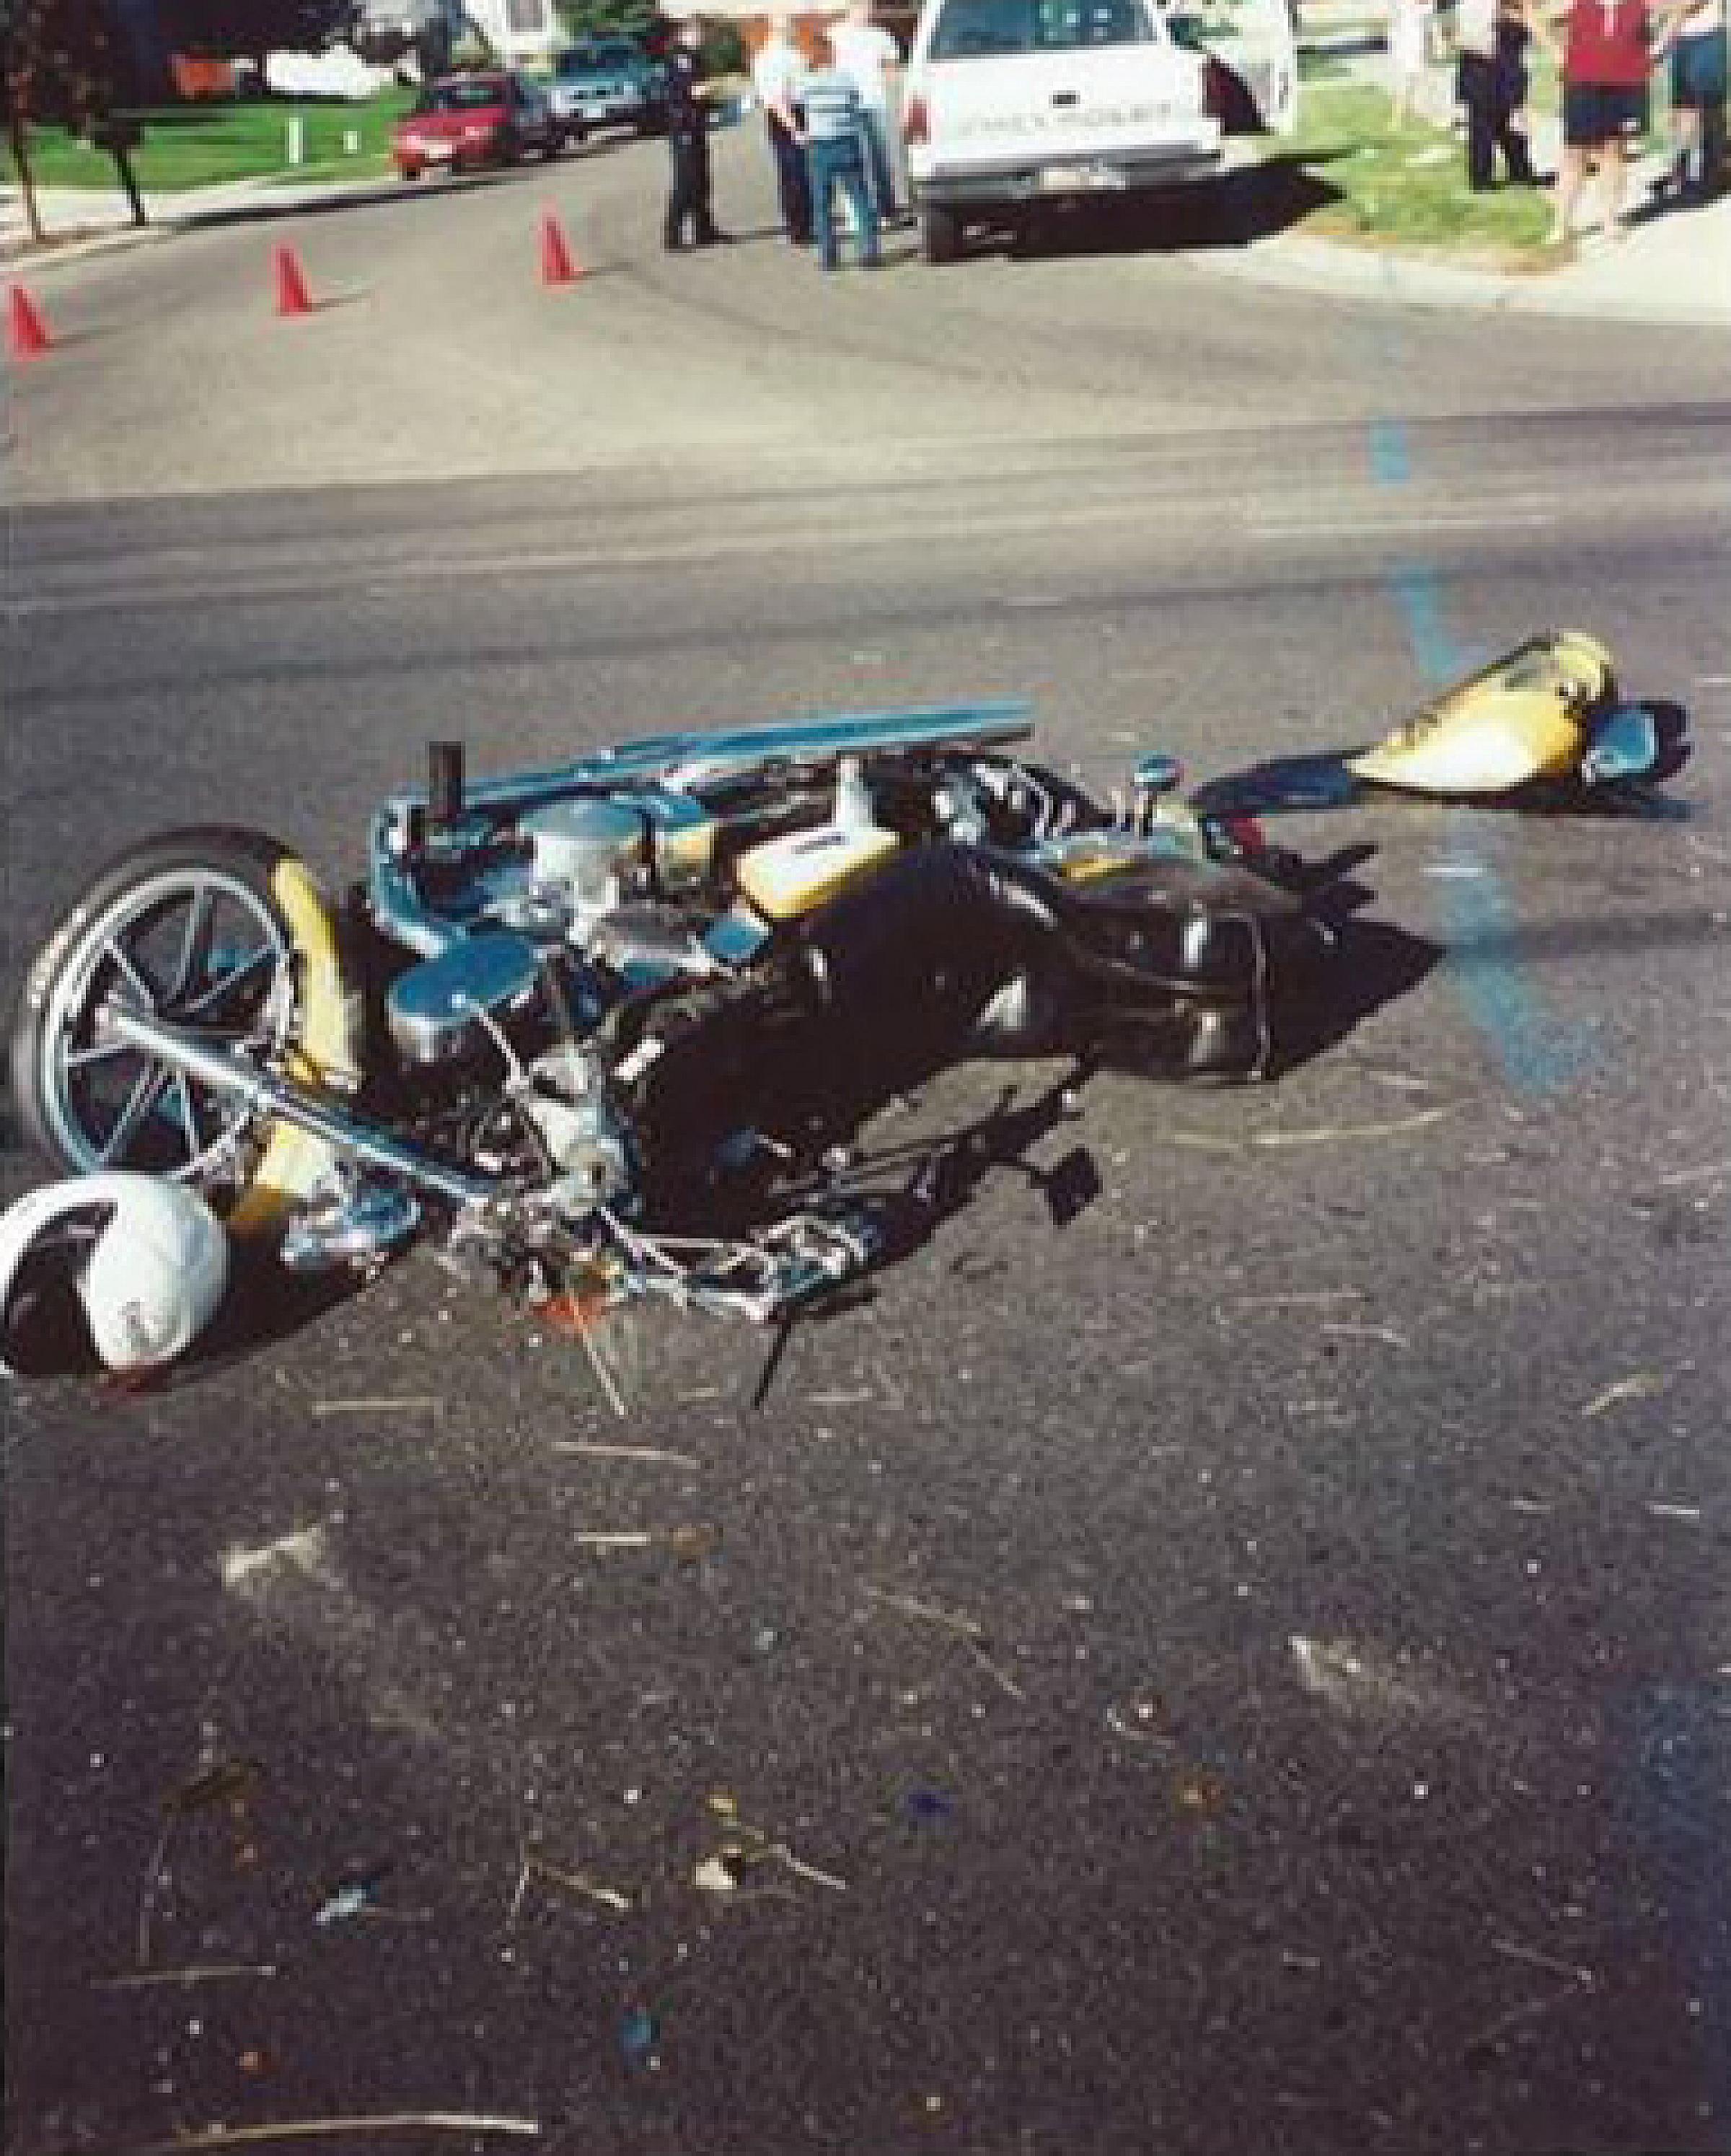 Bruce Miller's motorcycle after his accident